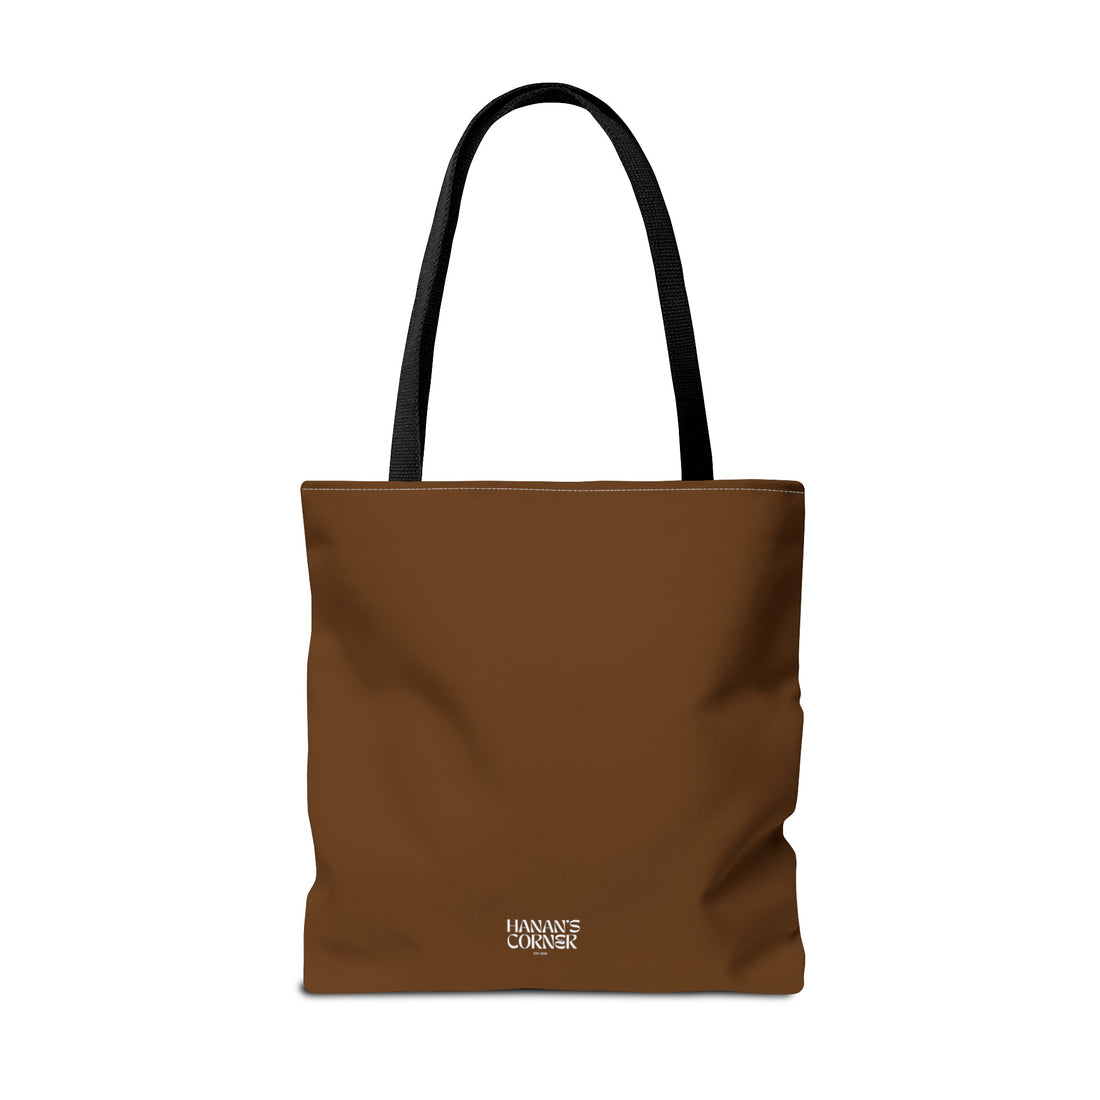 What is Todays Topic? - Revolution - Tote Bag